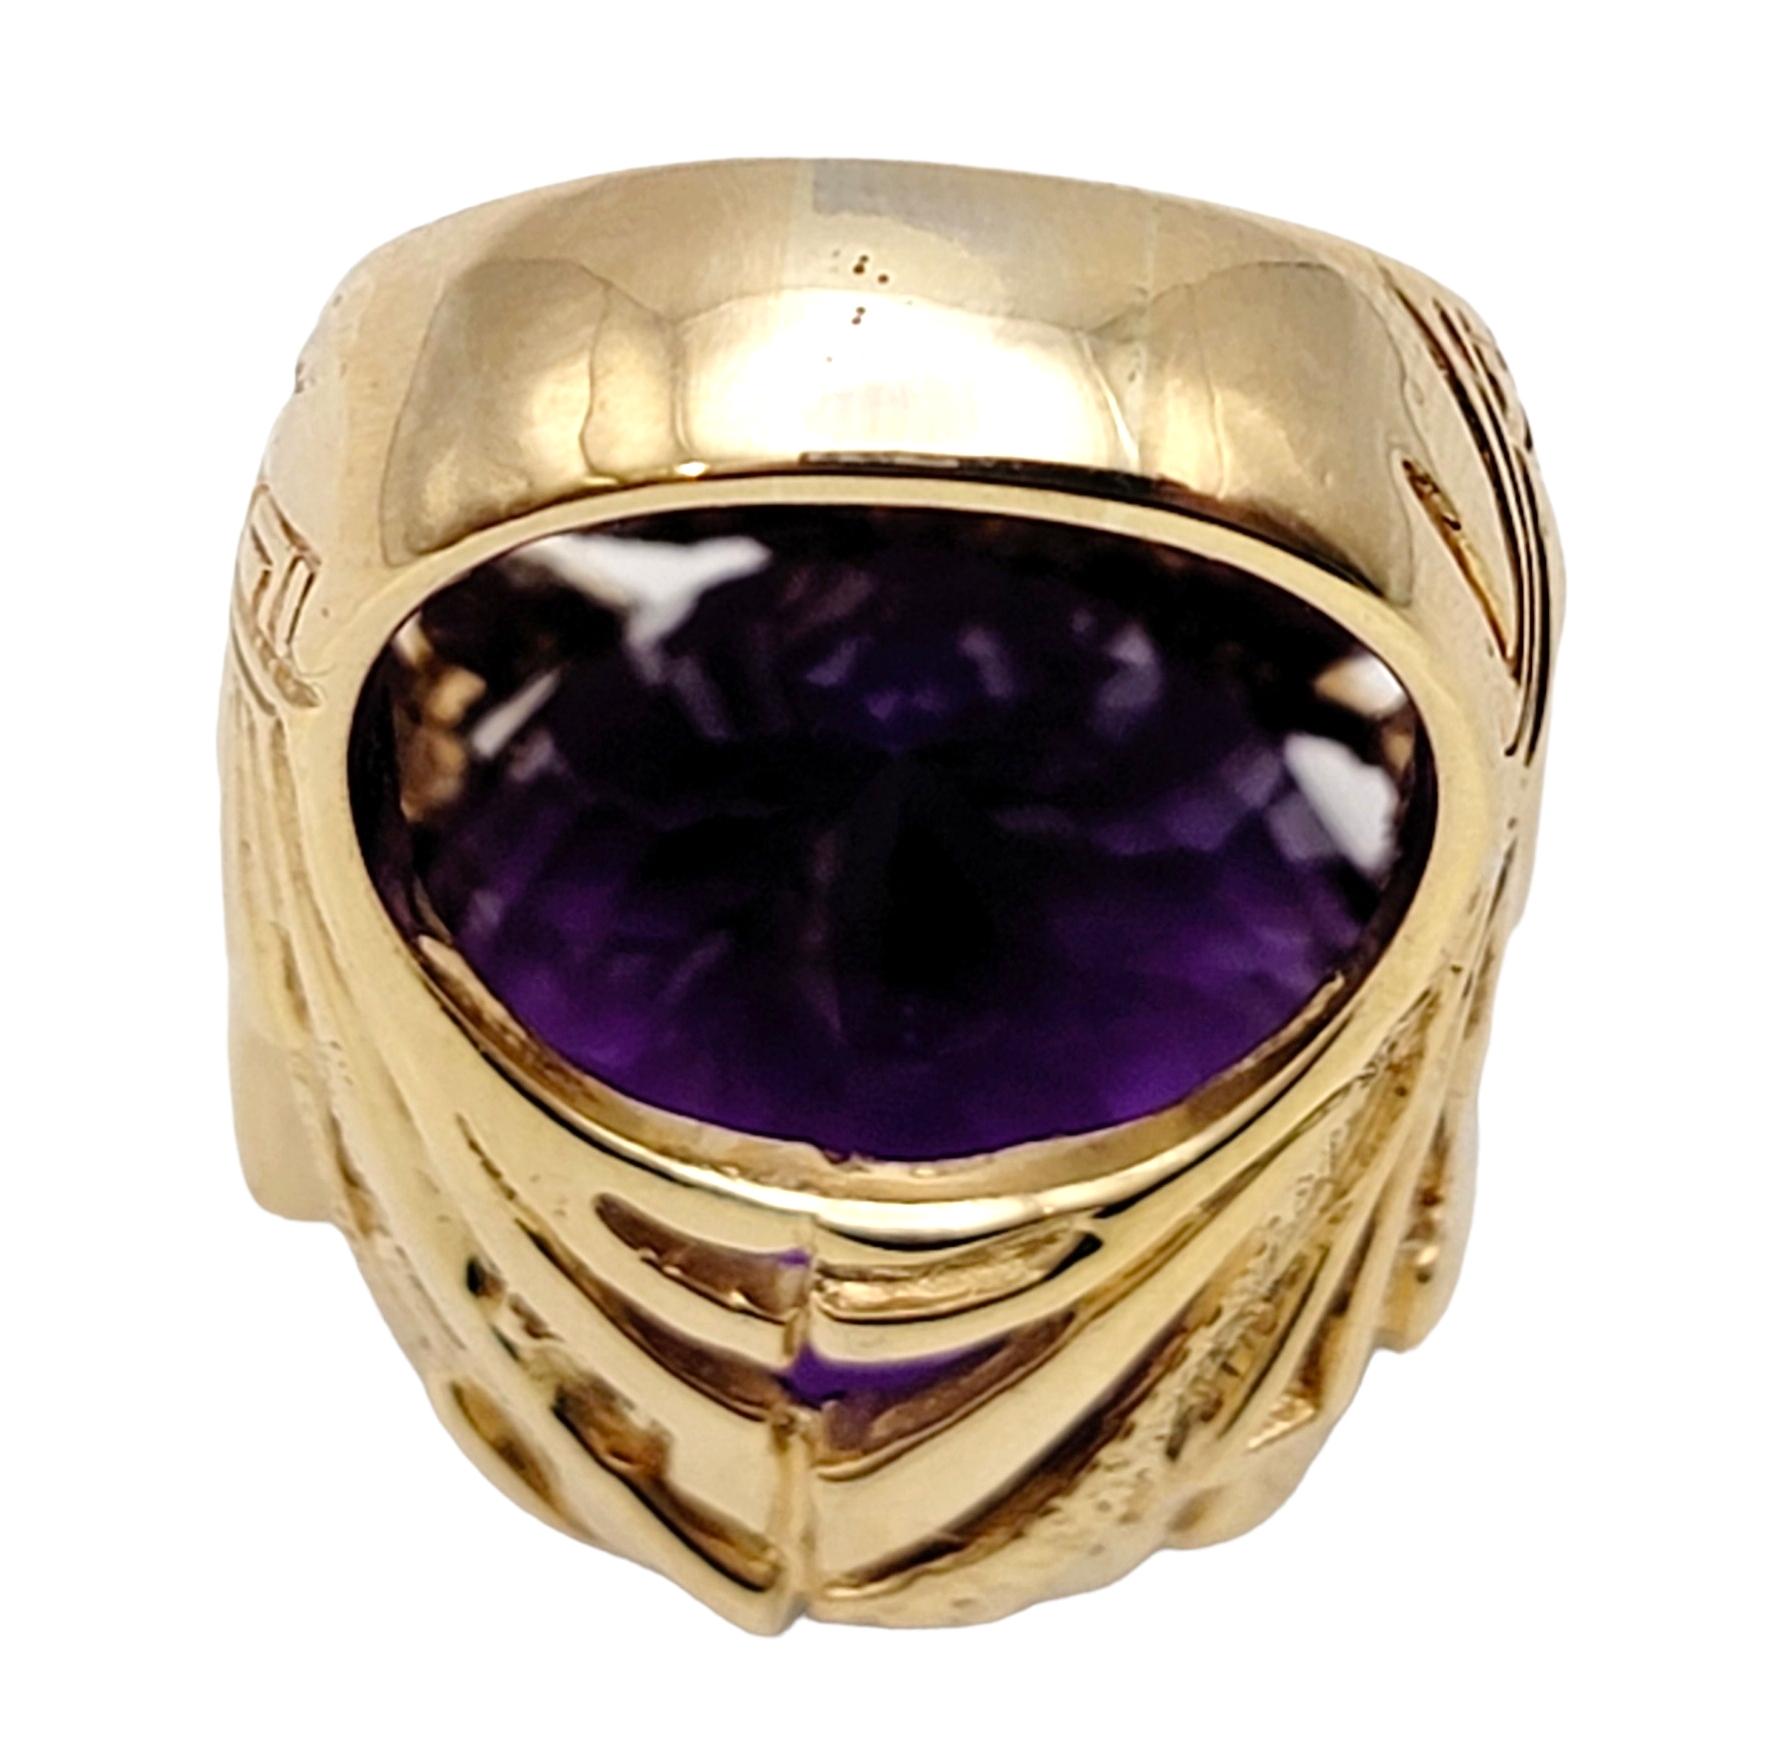 Massive 40.01 Carat Round Cut Amethyst Solitaire Cocktail Ring in Yellow Gold  For Sale 4